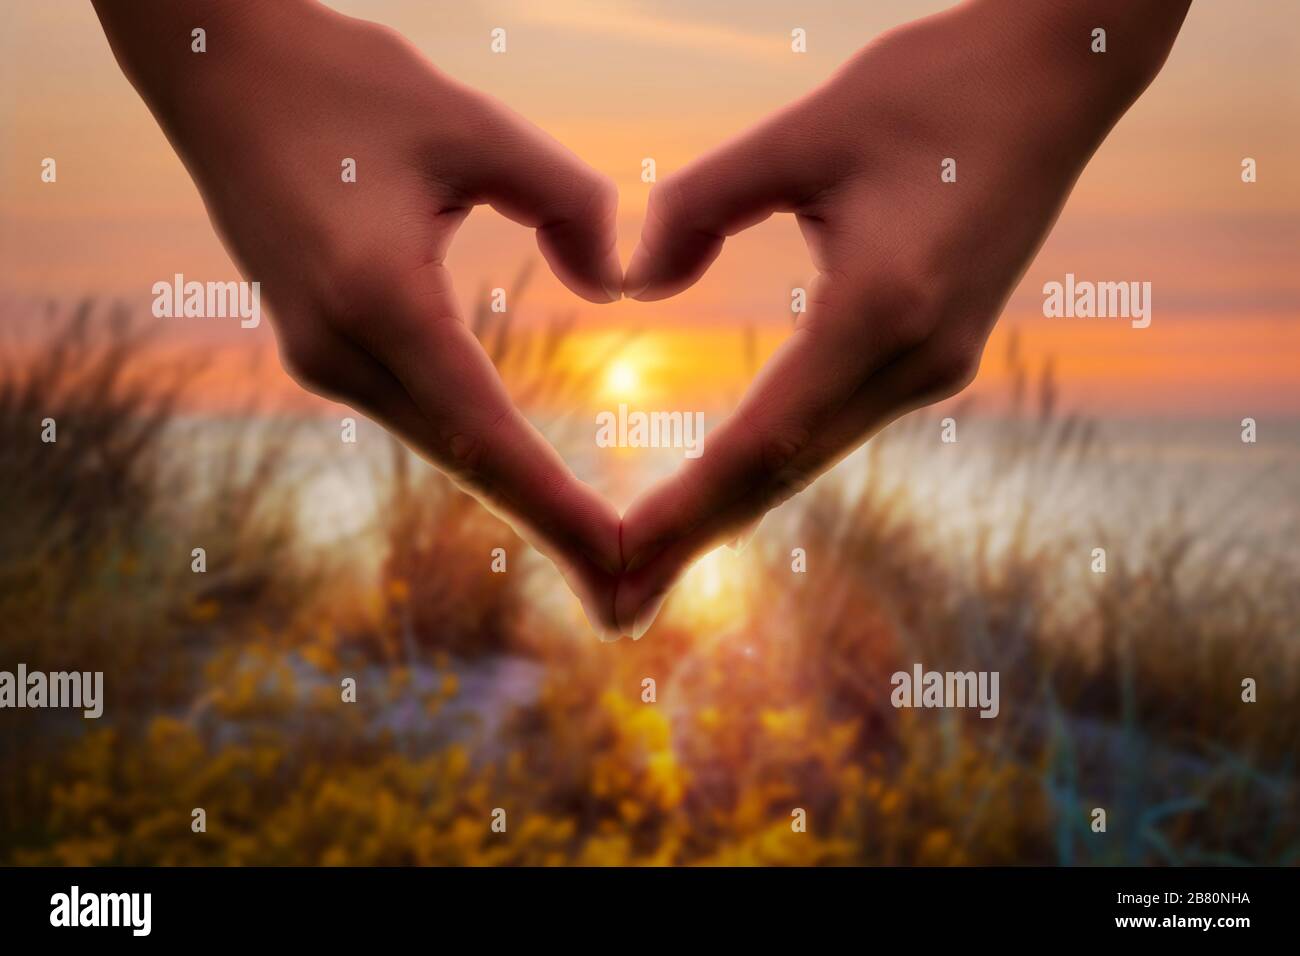 Heart shape with hands in the sunrise. A statement for a good life. Stock Photo